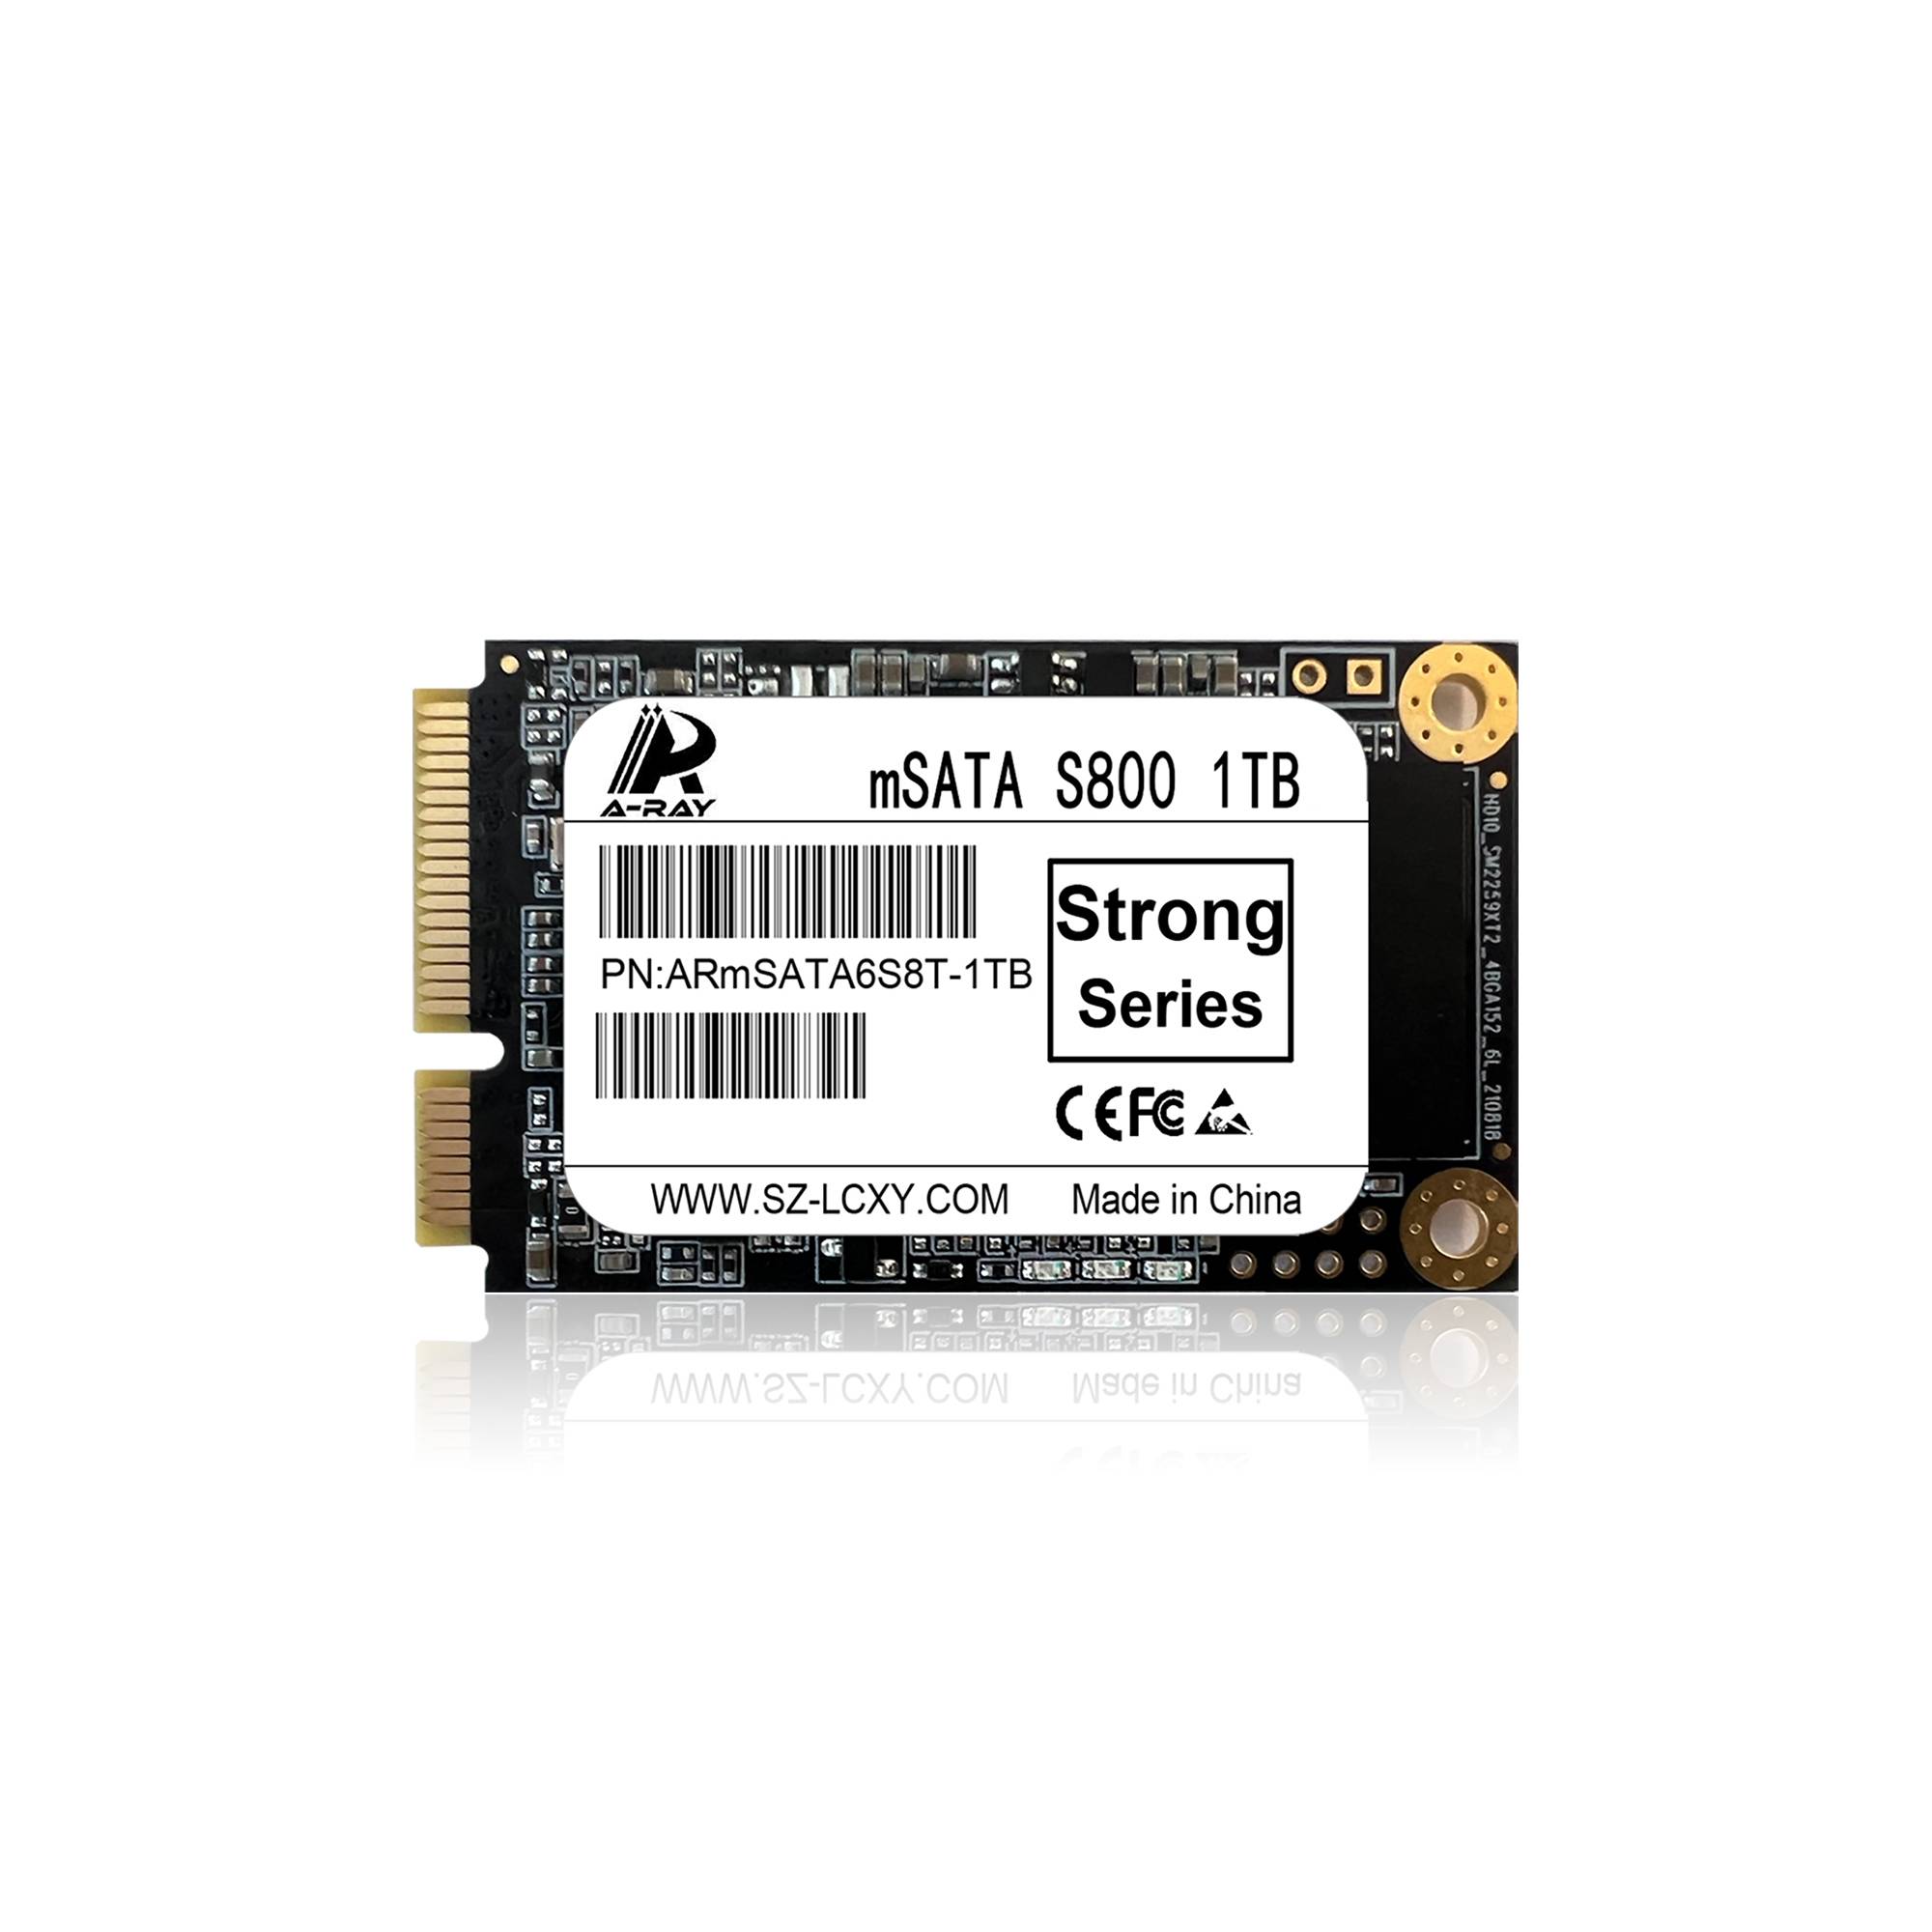 Ổ cứng SSD 1TB A-RAY mSata 6GBps S800 Strong Series